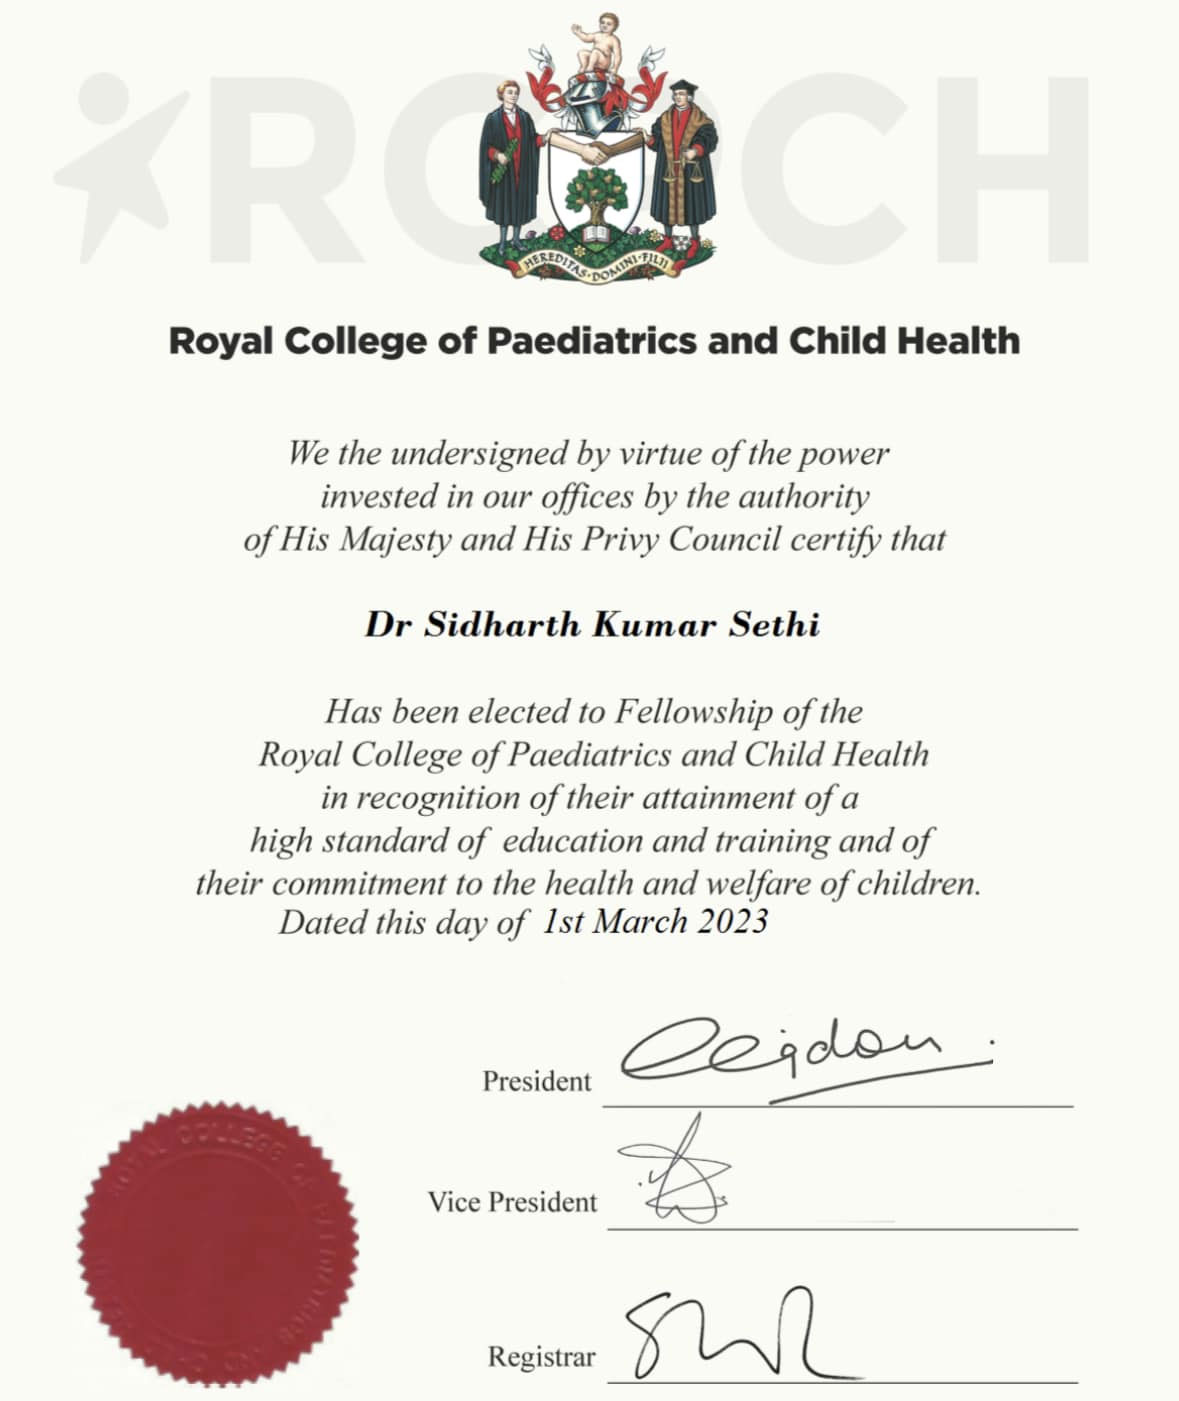 Thanks Royal College of Paediatrics and Child Health for the Award of FRCPCH (Fellow of Royal College of Paediatrics & Child Health), the Highest honour the Royal College bestows upon its members.